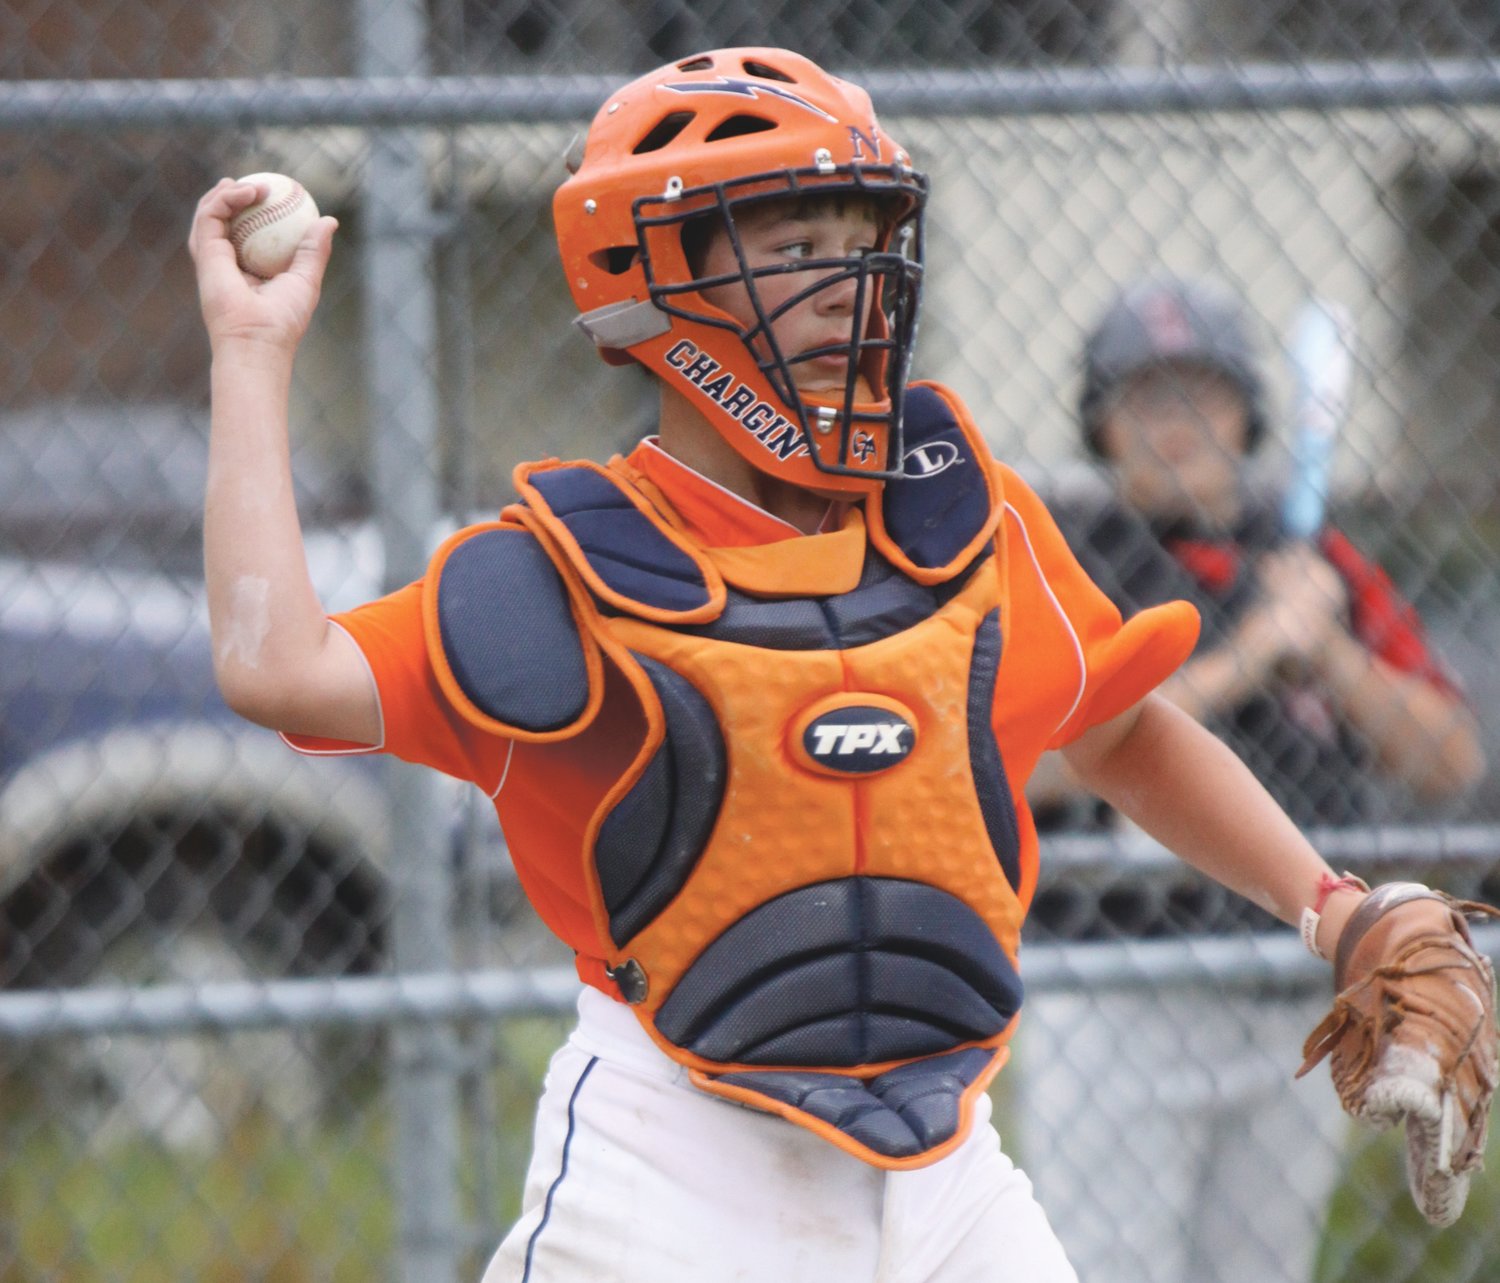 North Montgomery grad Baylee Adams tosses a ball back to the pitcher during a little league game more than 10 years ago. Adams saw his playing career end with the cancellation of the remainder of his senior season at Marian University.